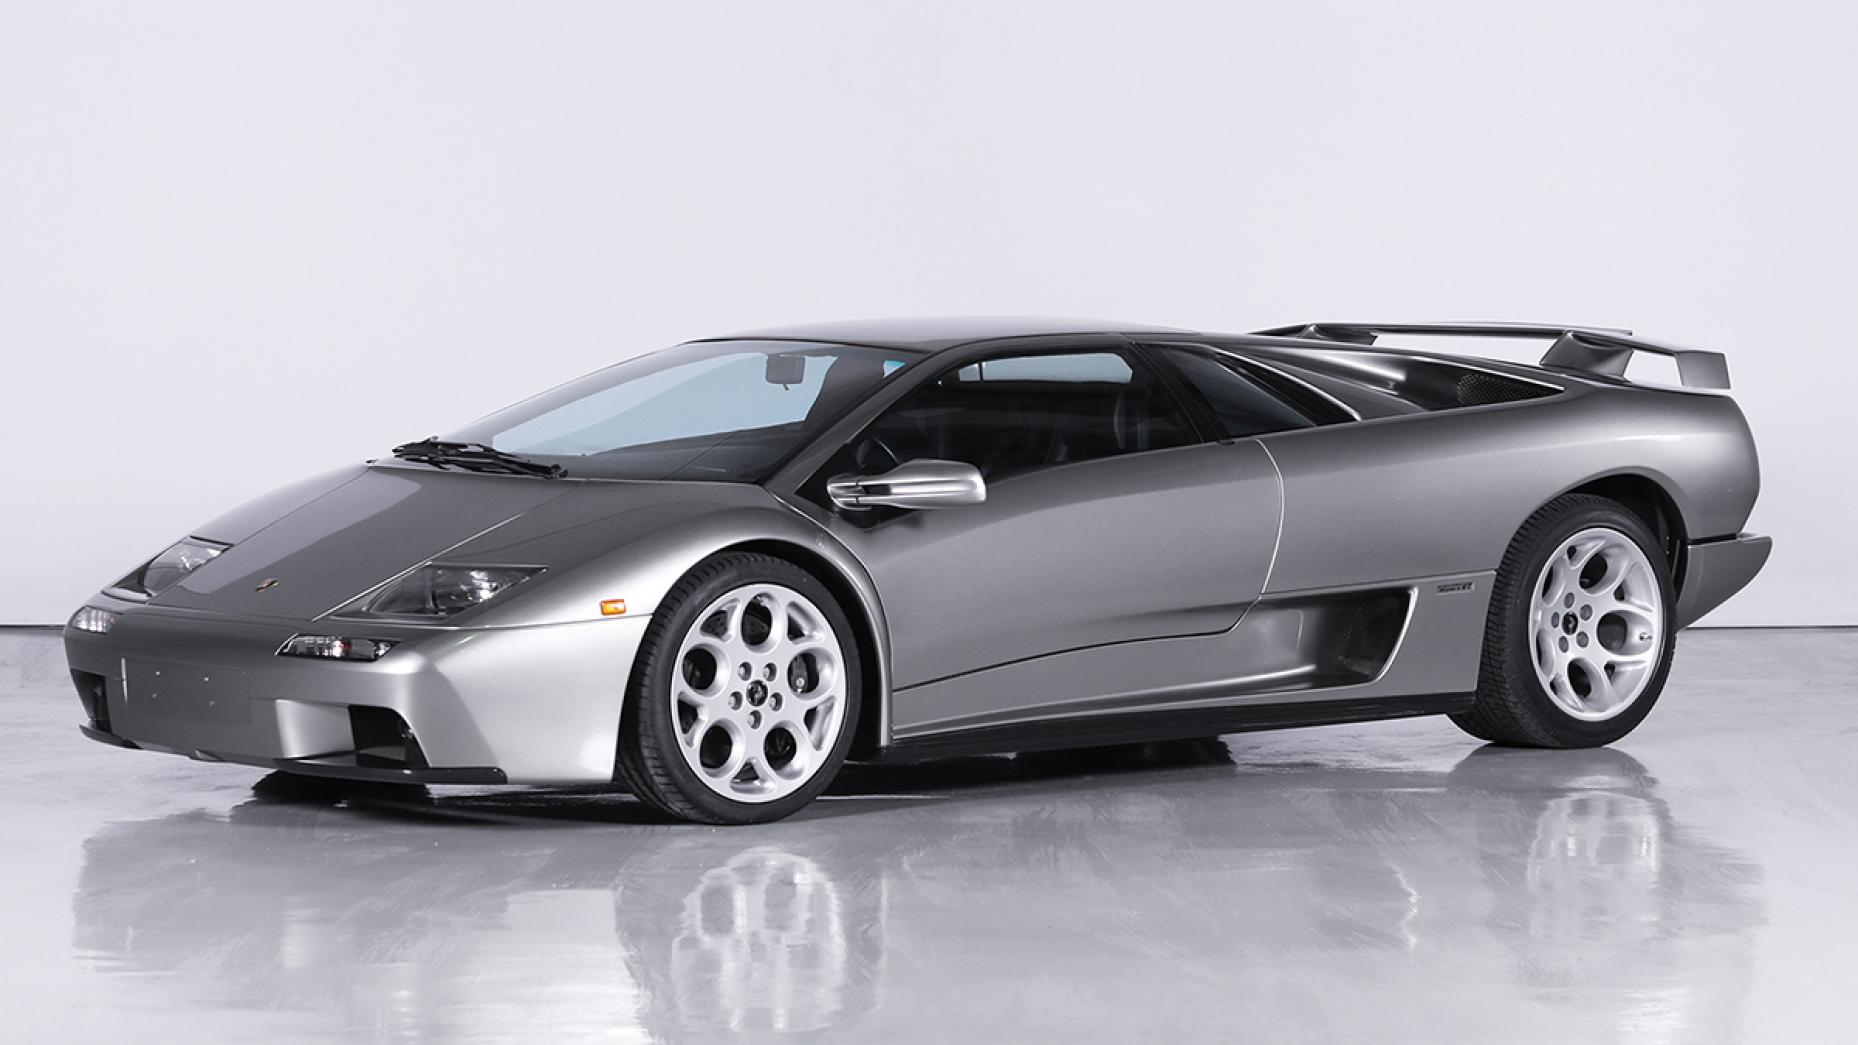 Check out these stunning supercars heading to auction